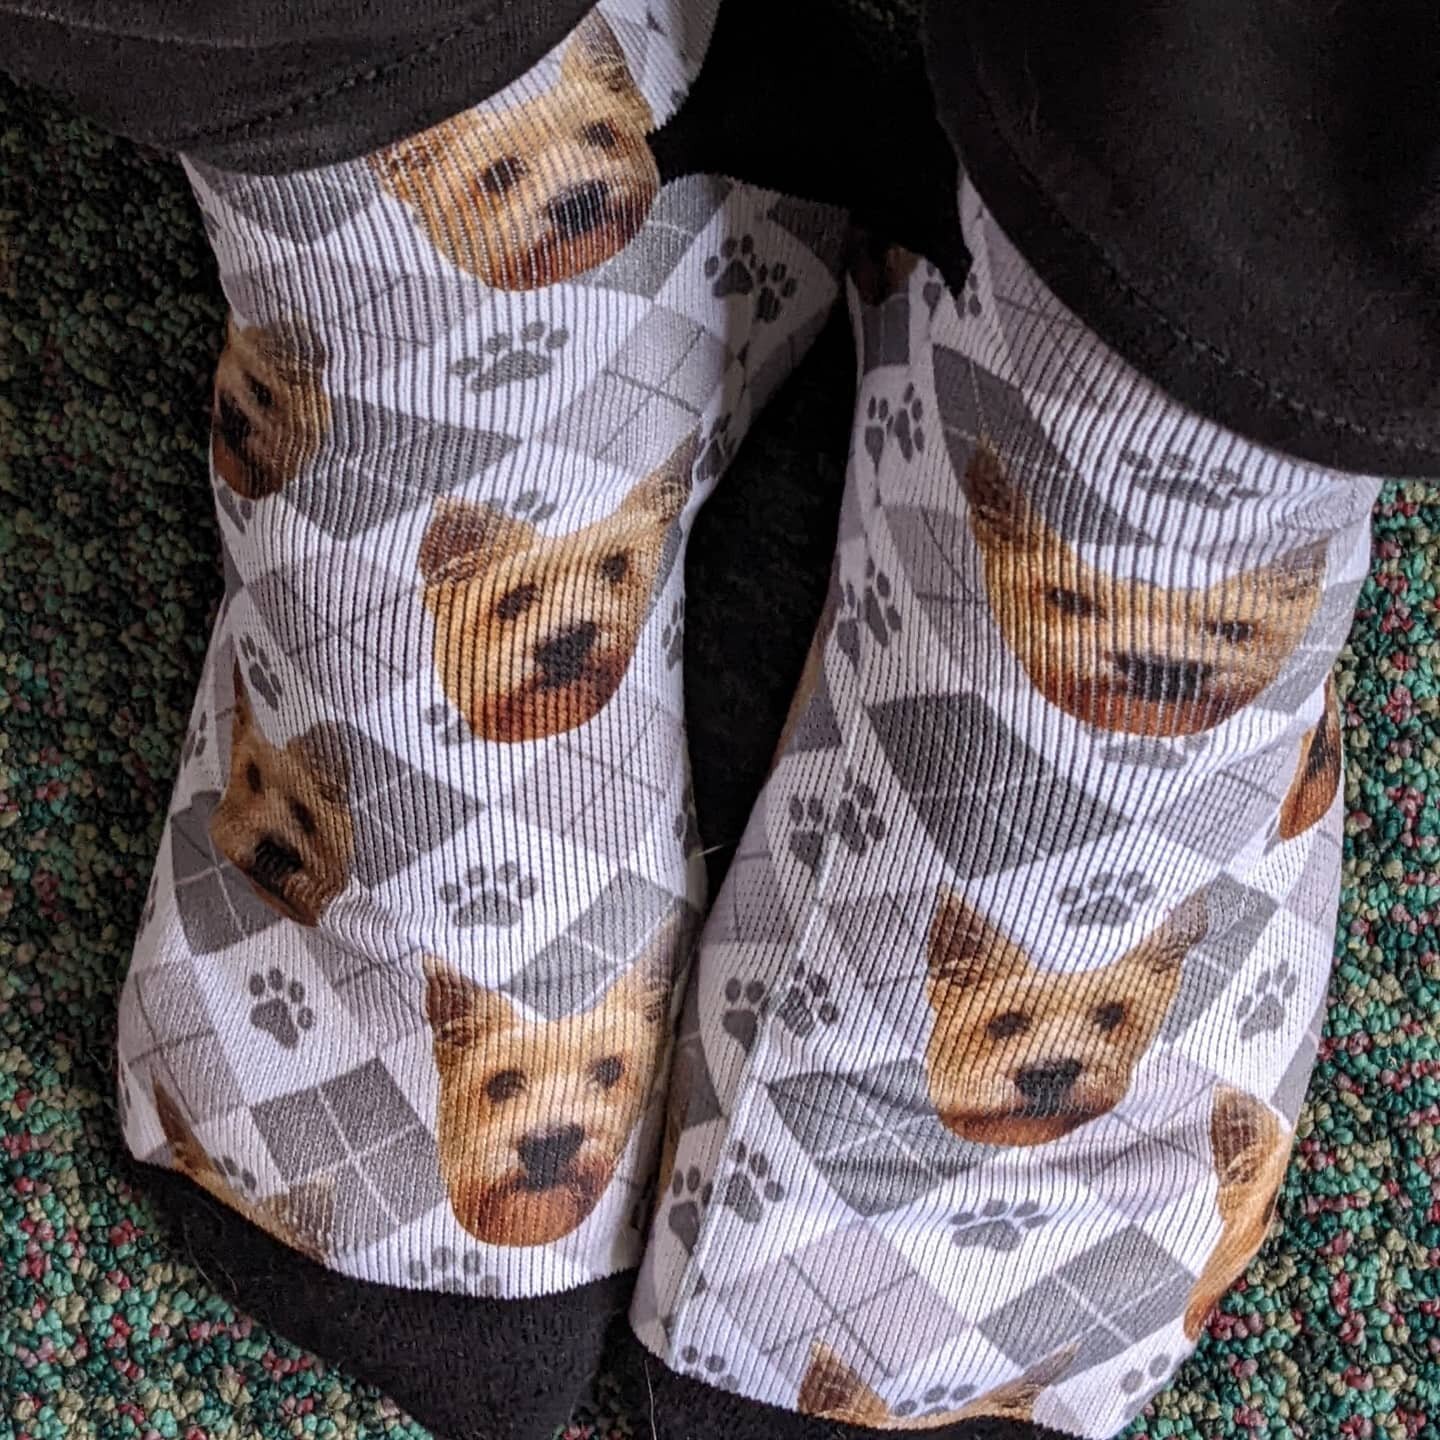 Socks appreciation post. They have a picture of my furry son on them. Amazing! Thank you @red_delia for the awesome gift.